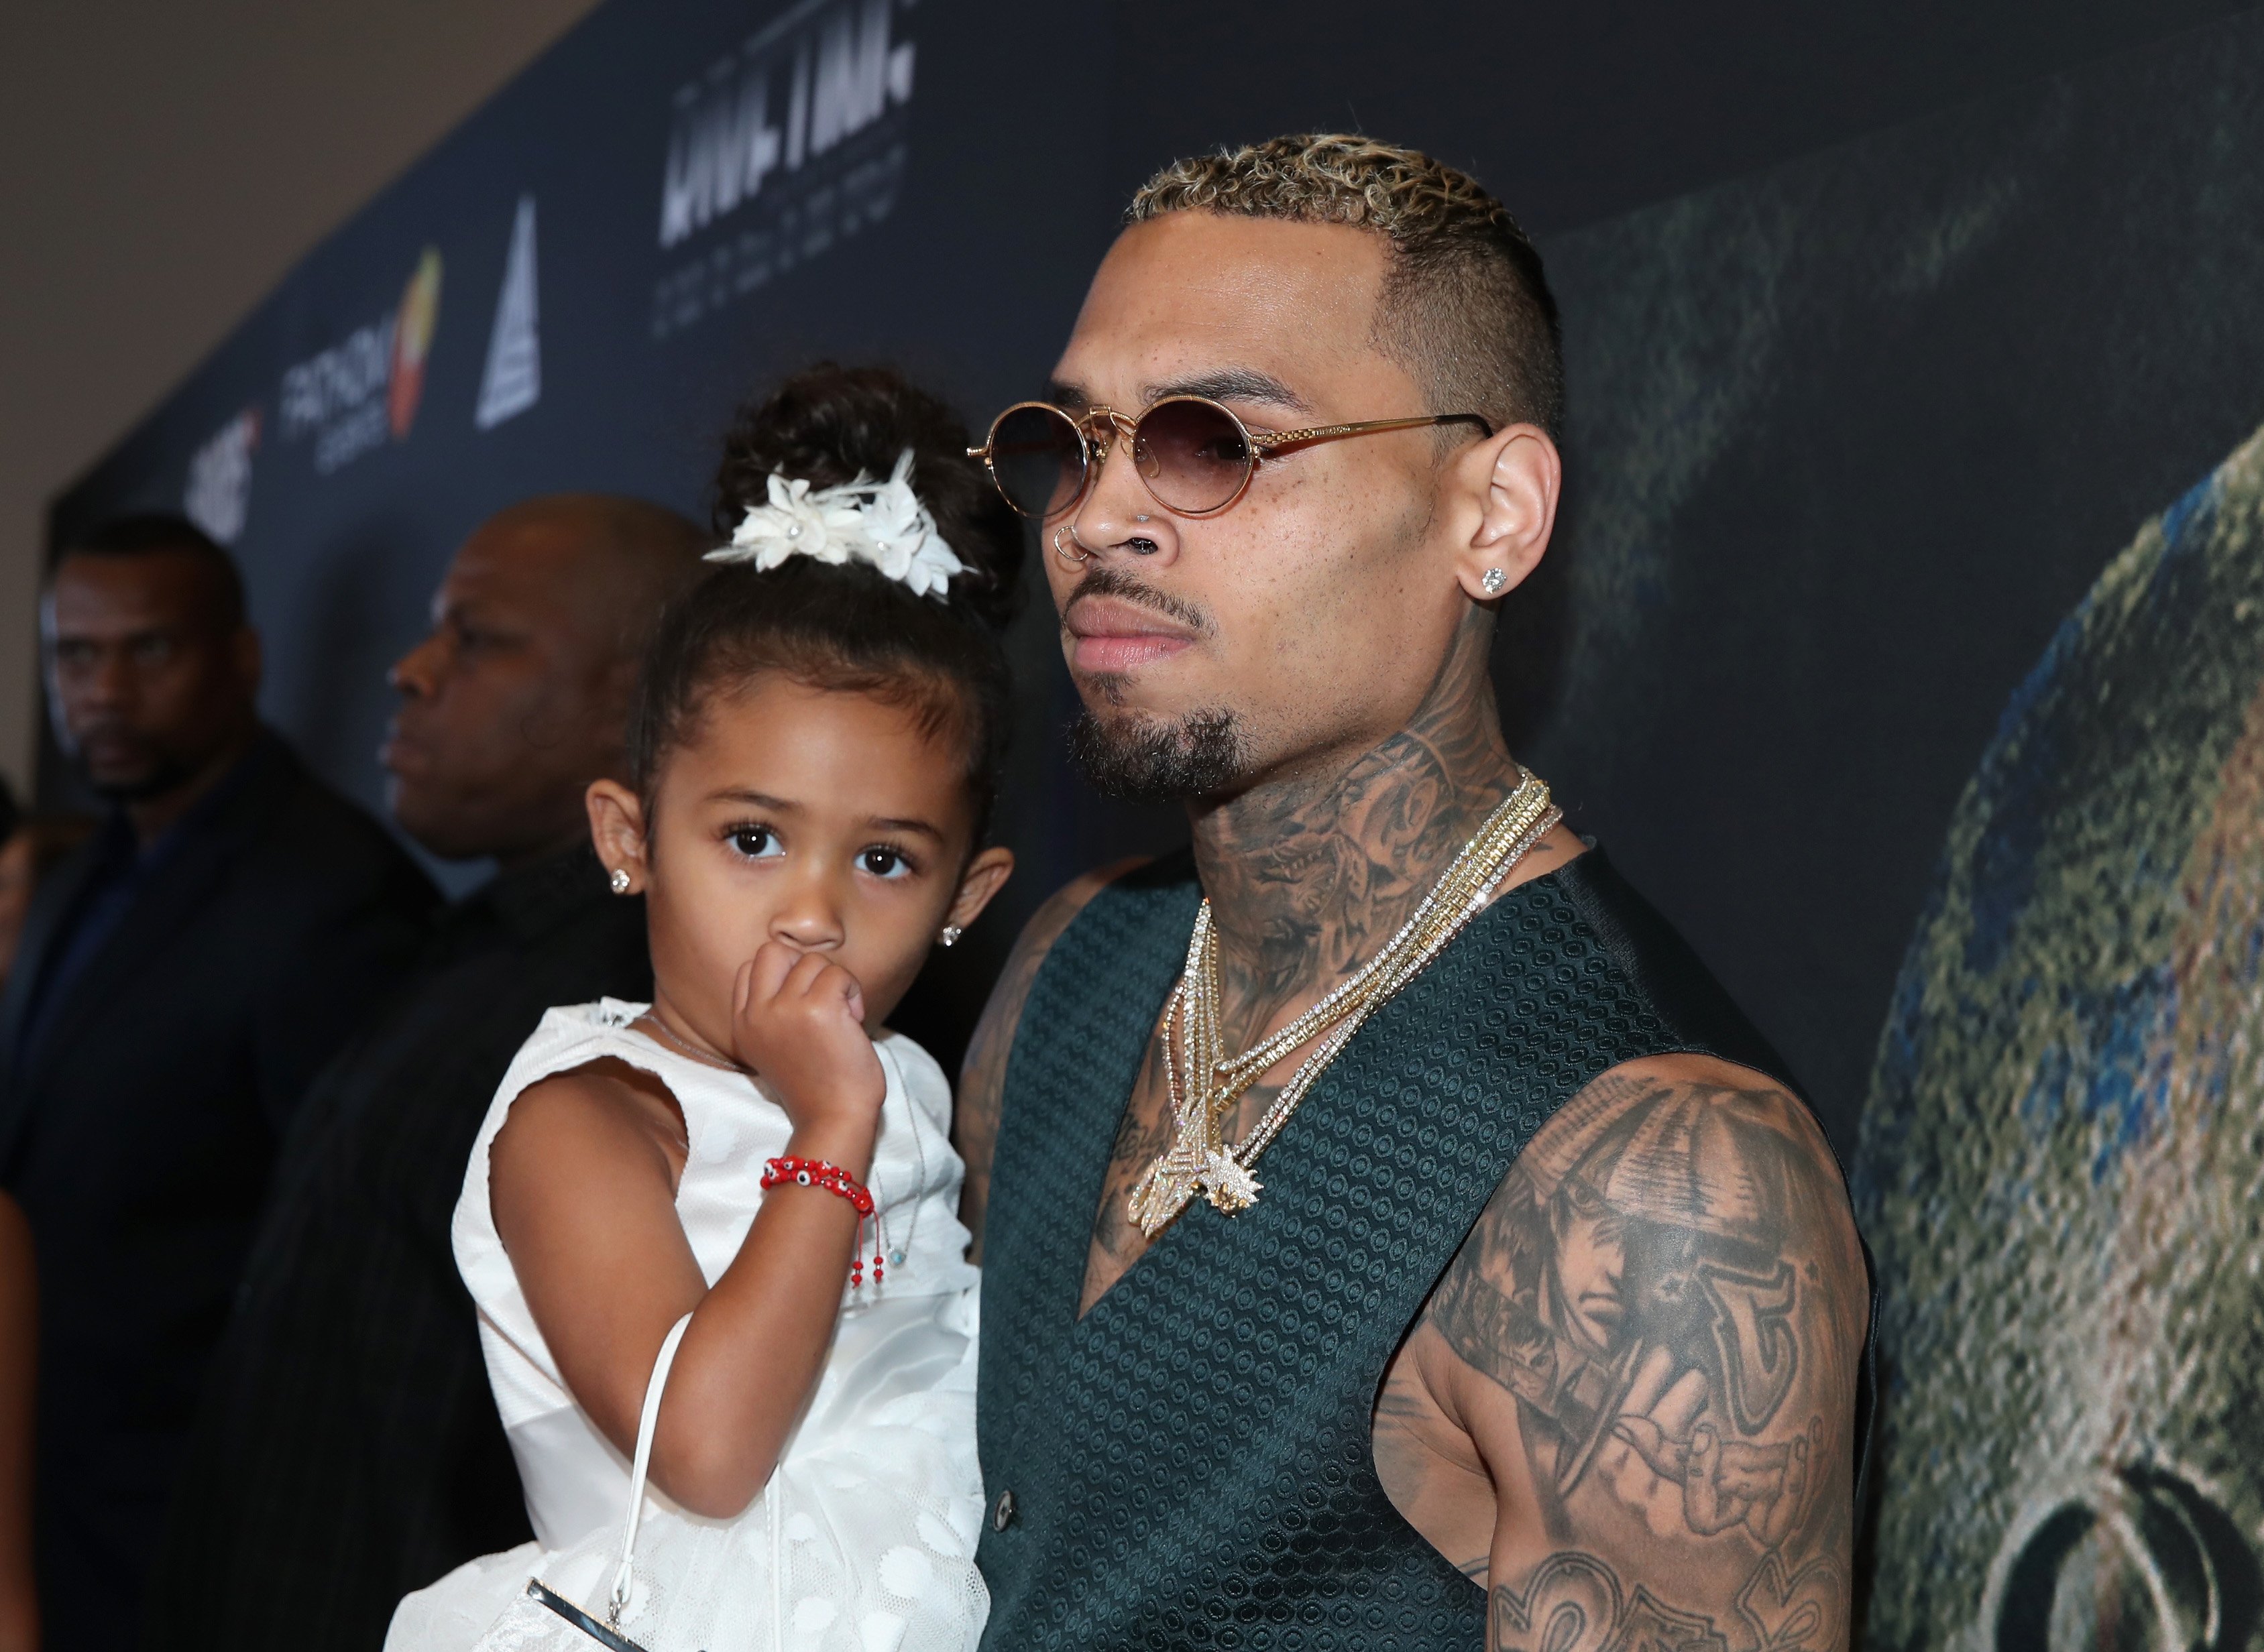 Chris Brown and Royalty Brown at the premiere of "Chris Brown: Welcome To My Life" at L.A. LIVE on June 6, 2017. | Photo: Getty Images